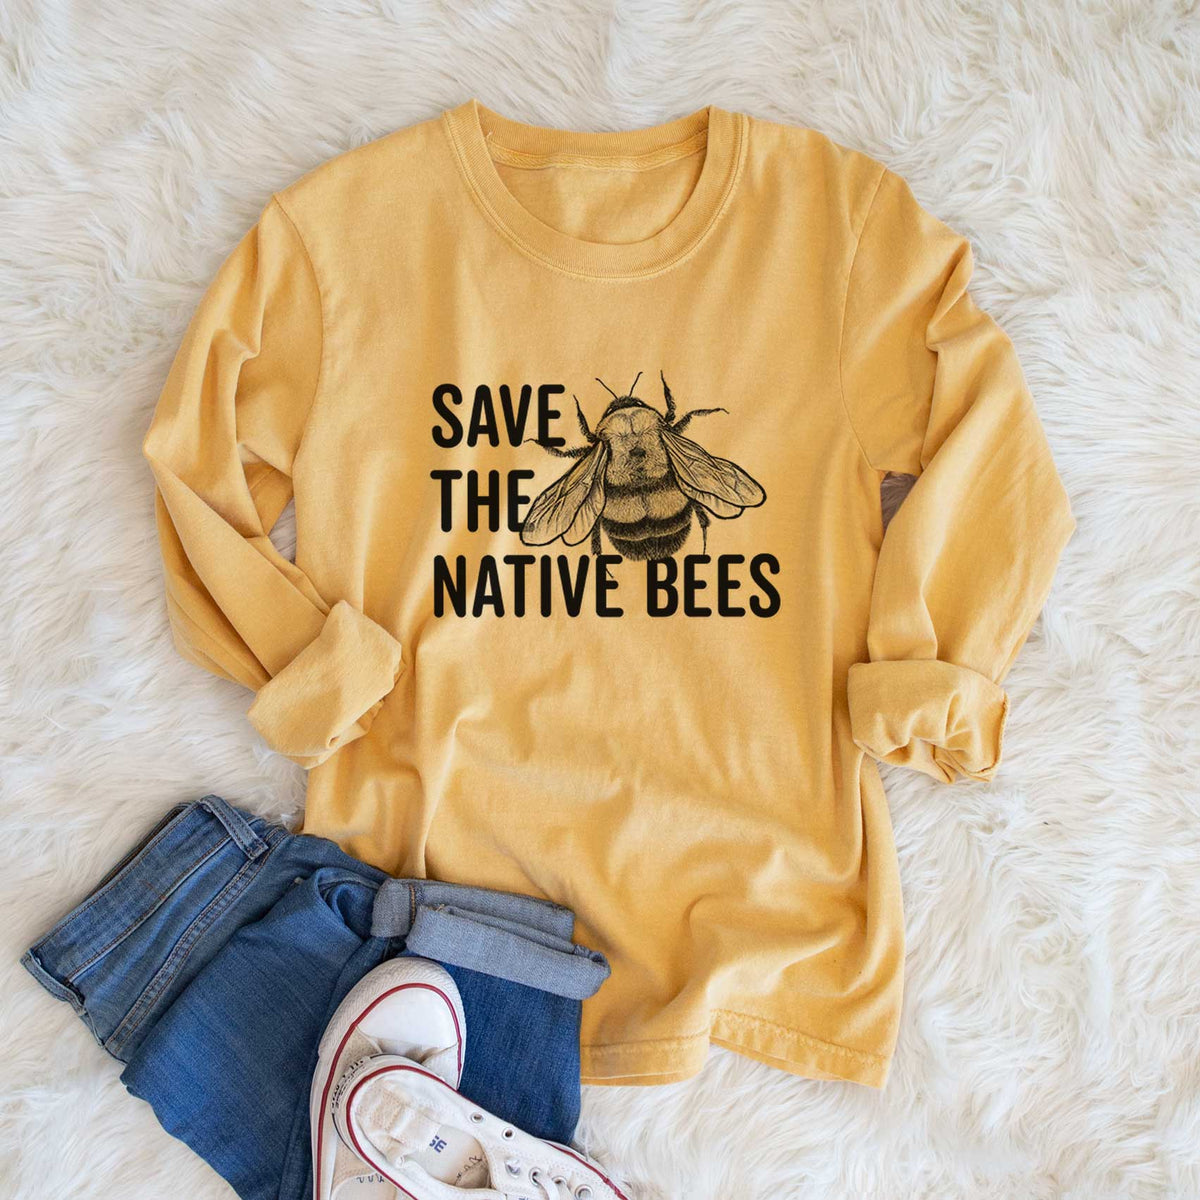 Save the Native Bees - Heavyweight 100% Cotton Long Sleeve